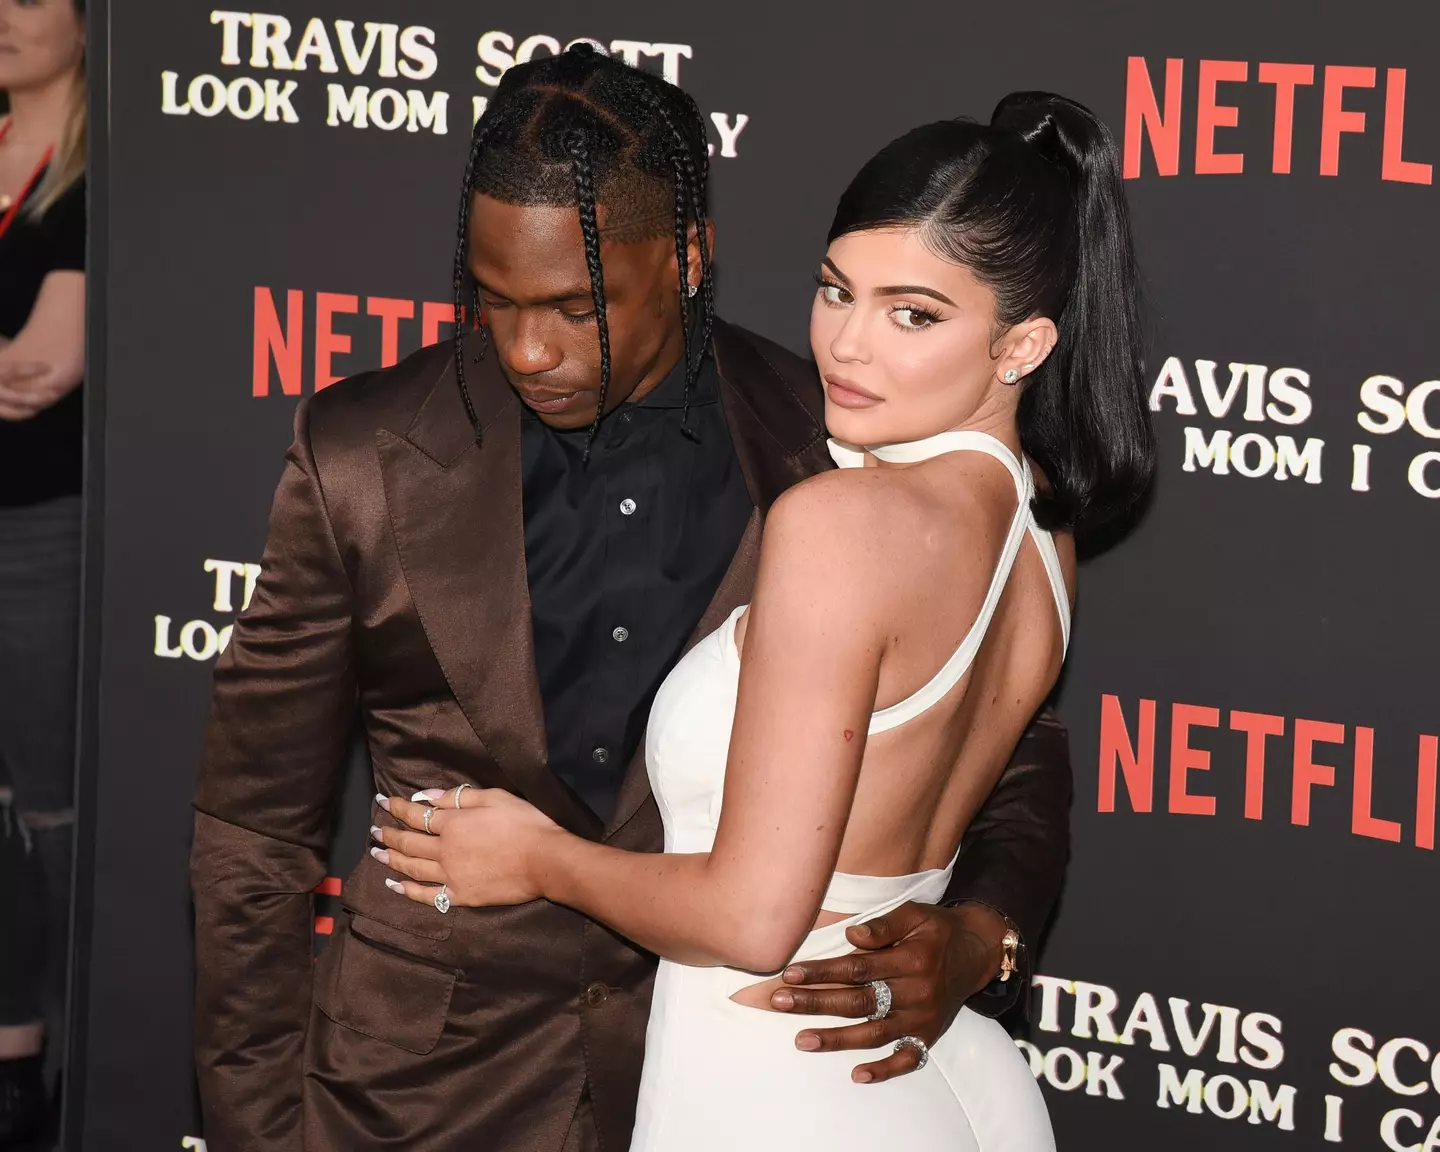 Kylie Jenner and Travis Scott have been wondering what to call their son.